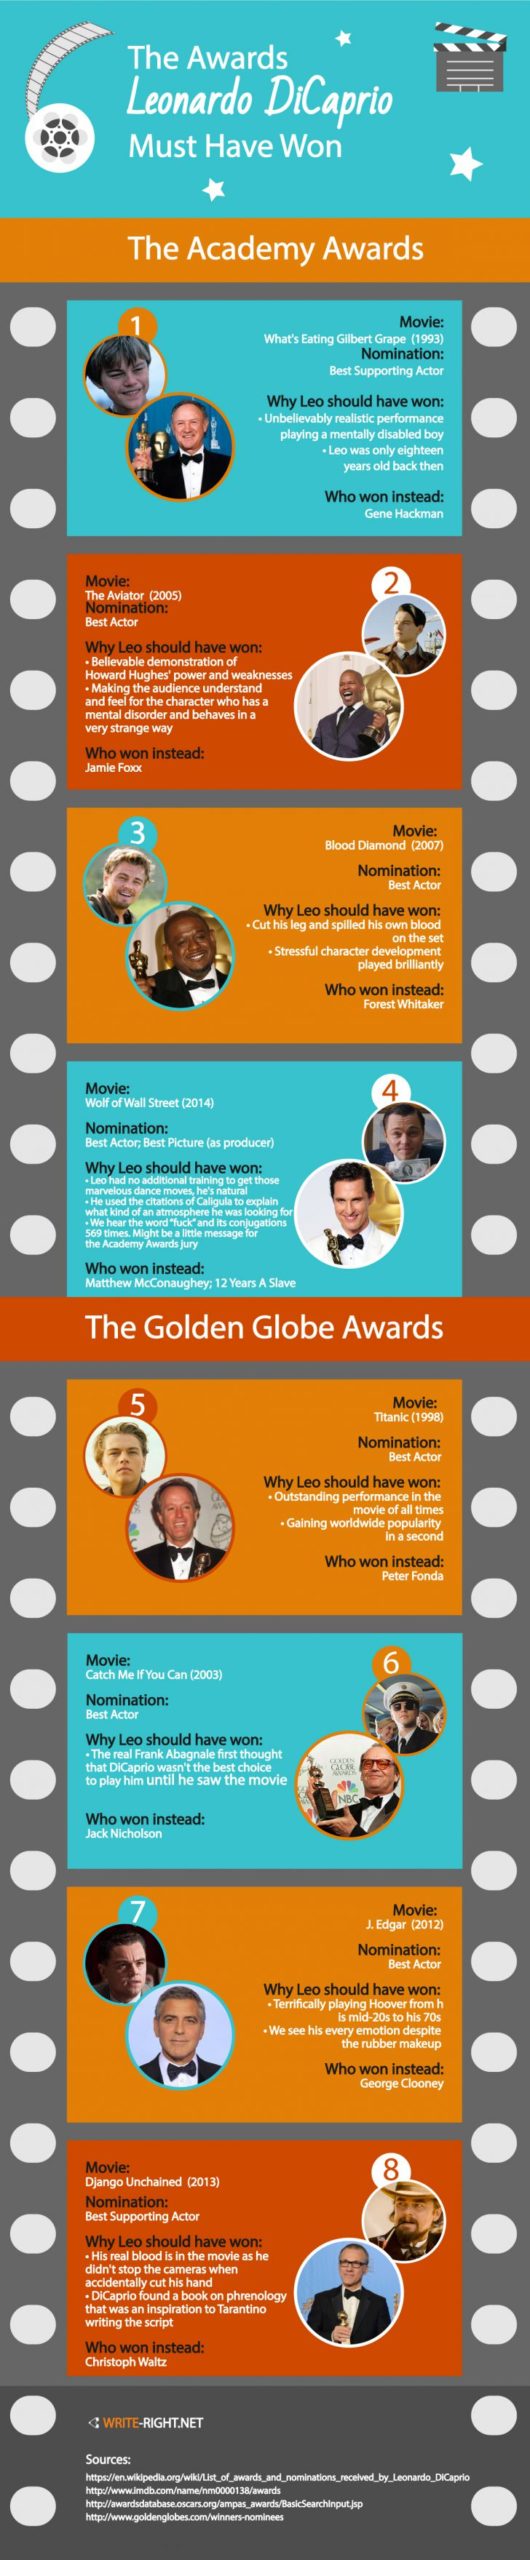 The+Awards+Leonardo+DiCaprio+Must+Have+Won+%5BINFOGRAPHIC%5D